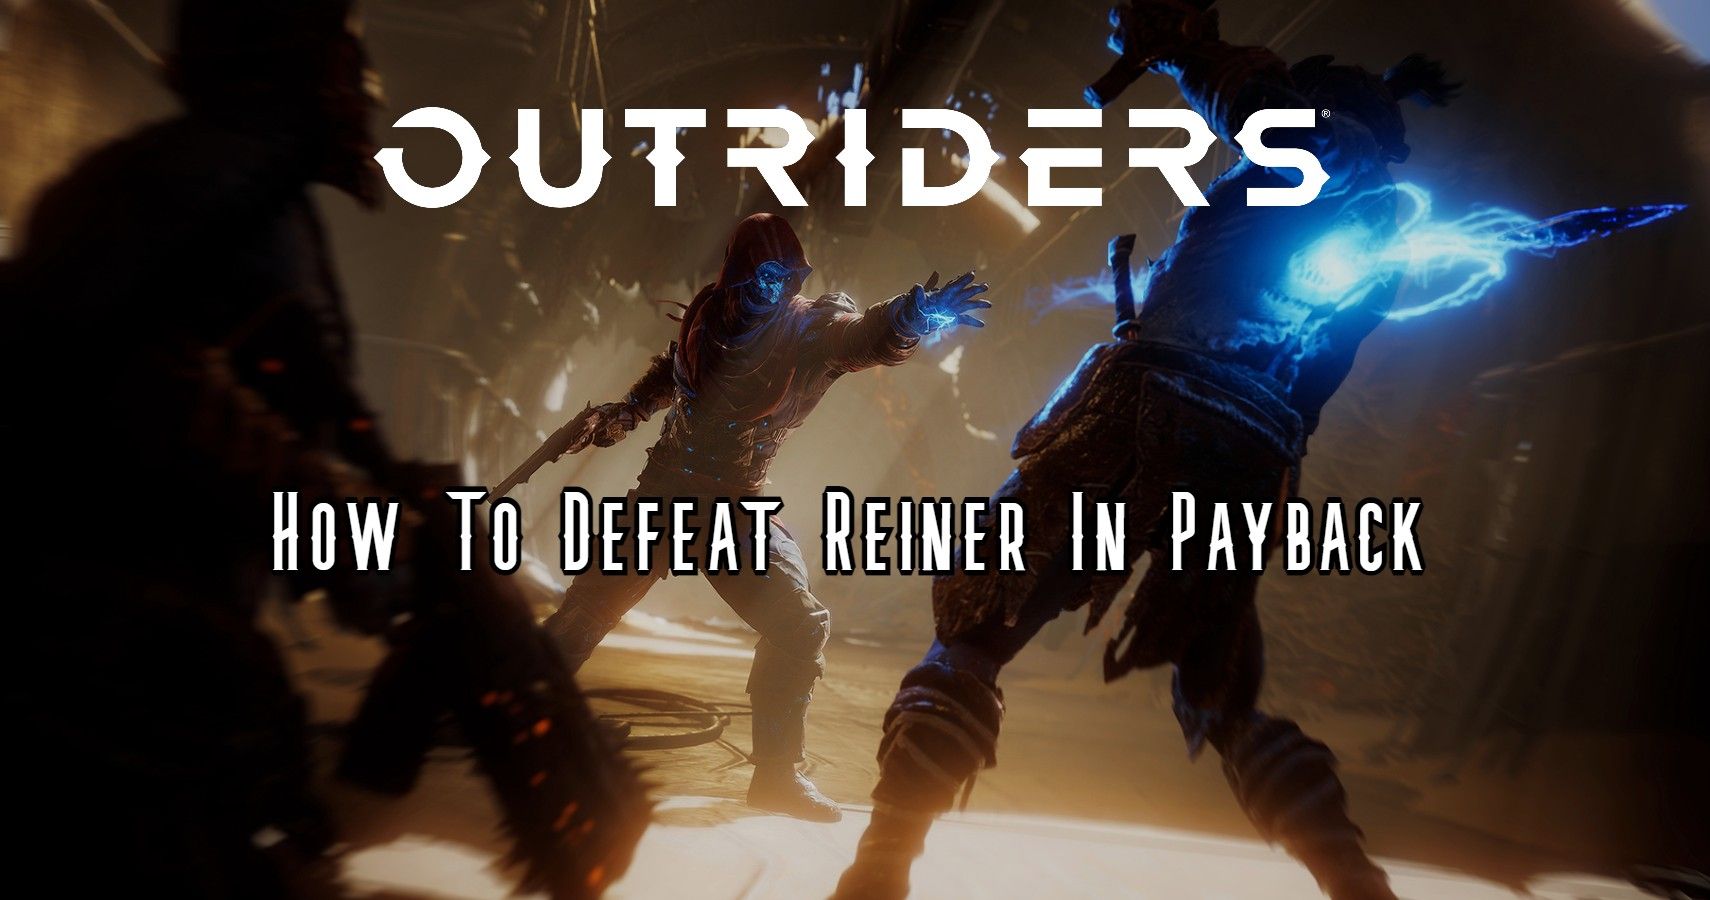 Outriders How To Defeat Reiner in Payback